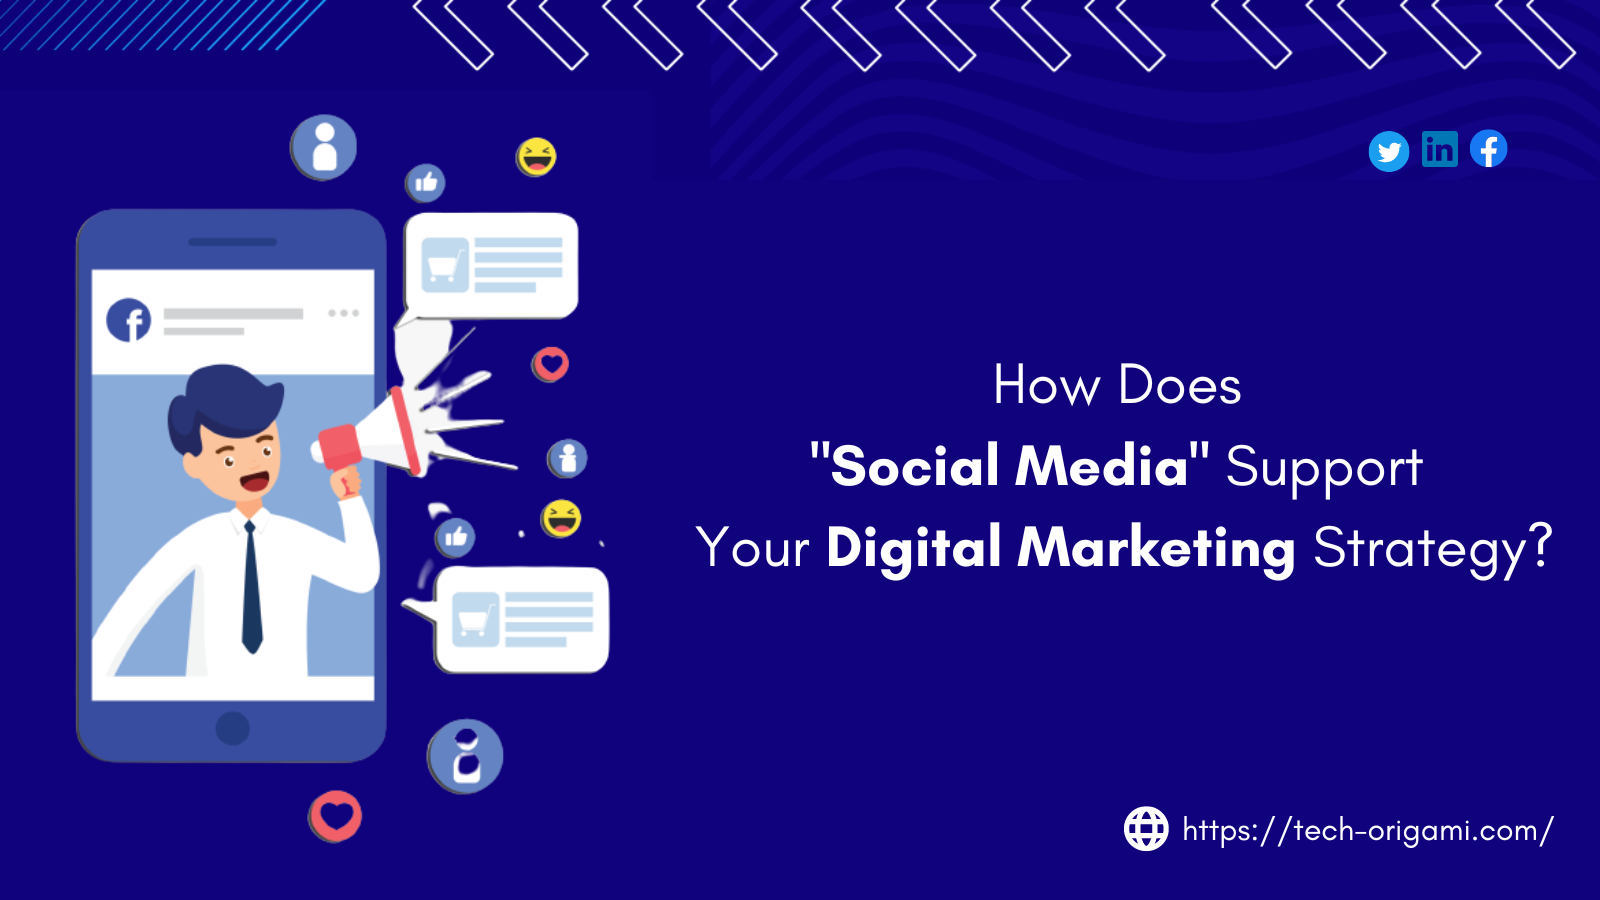 How Does Social Media Support Your Digital Marketing Strategy?